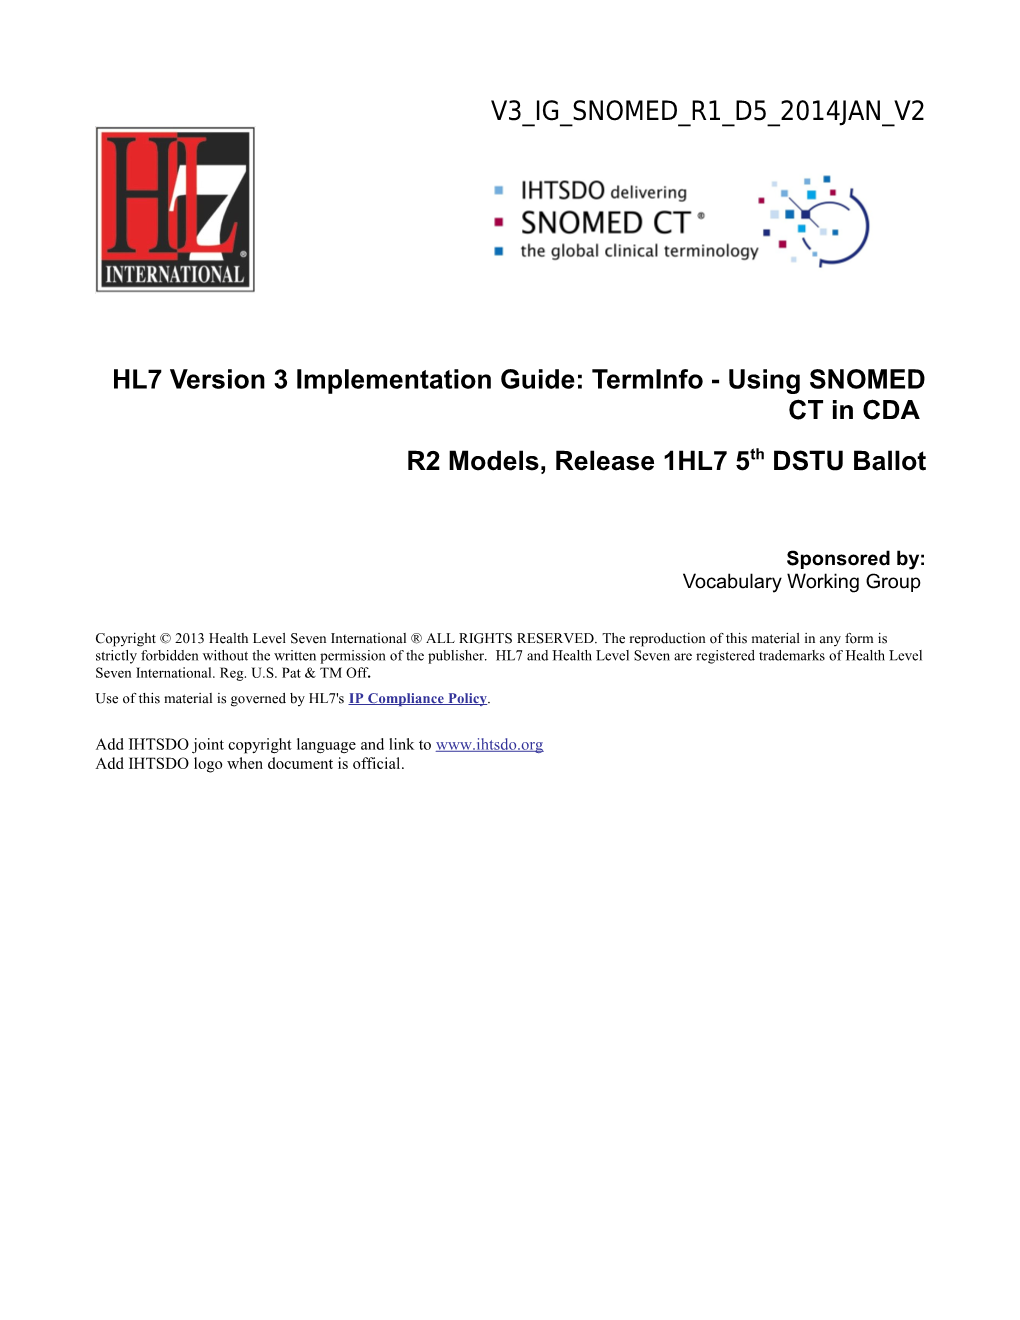 HL7 Version 3 Implementation Guide: Terminfo - Using SNOMED CT in CDA